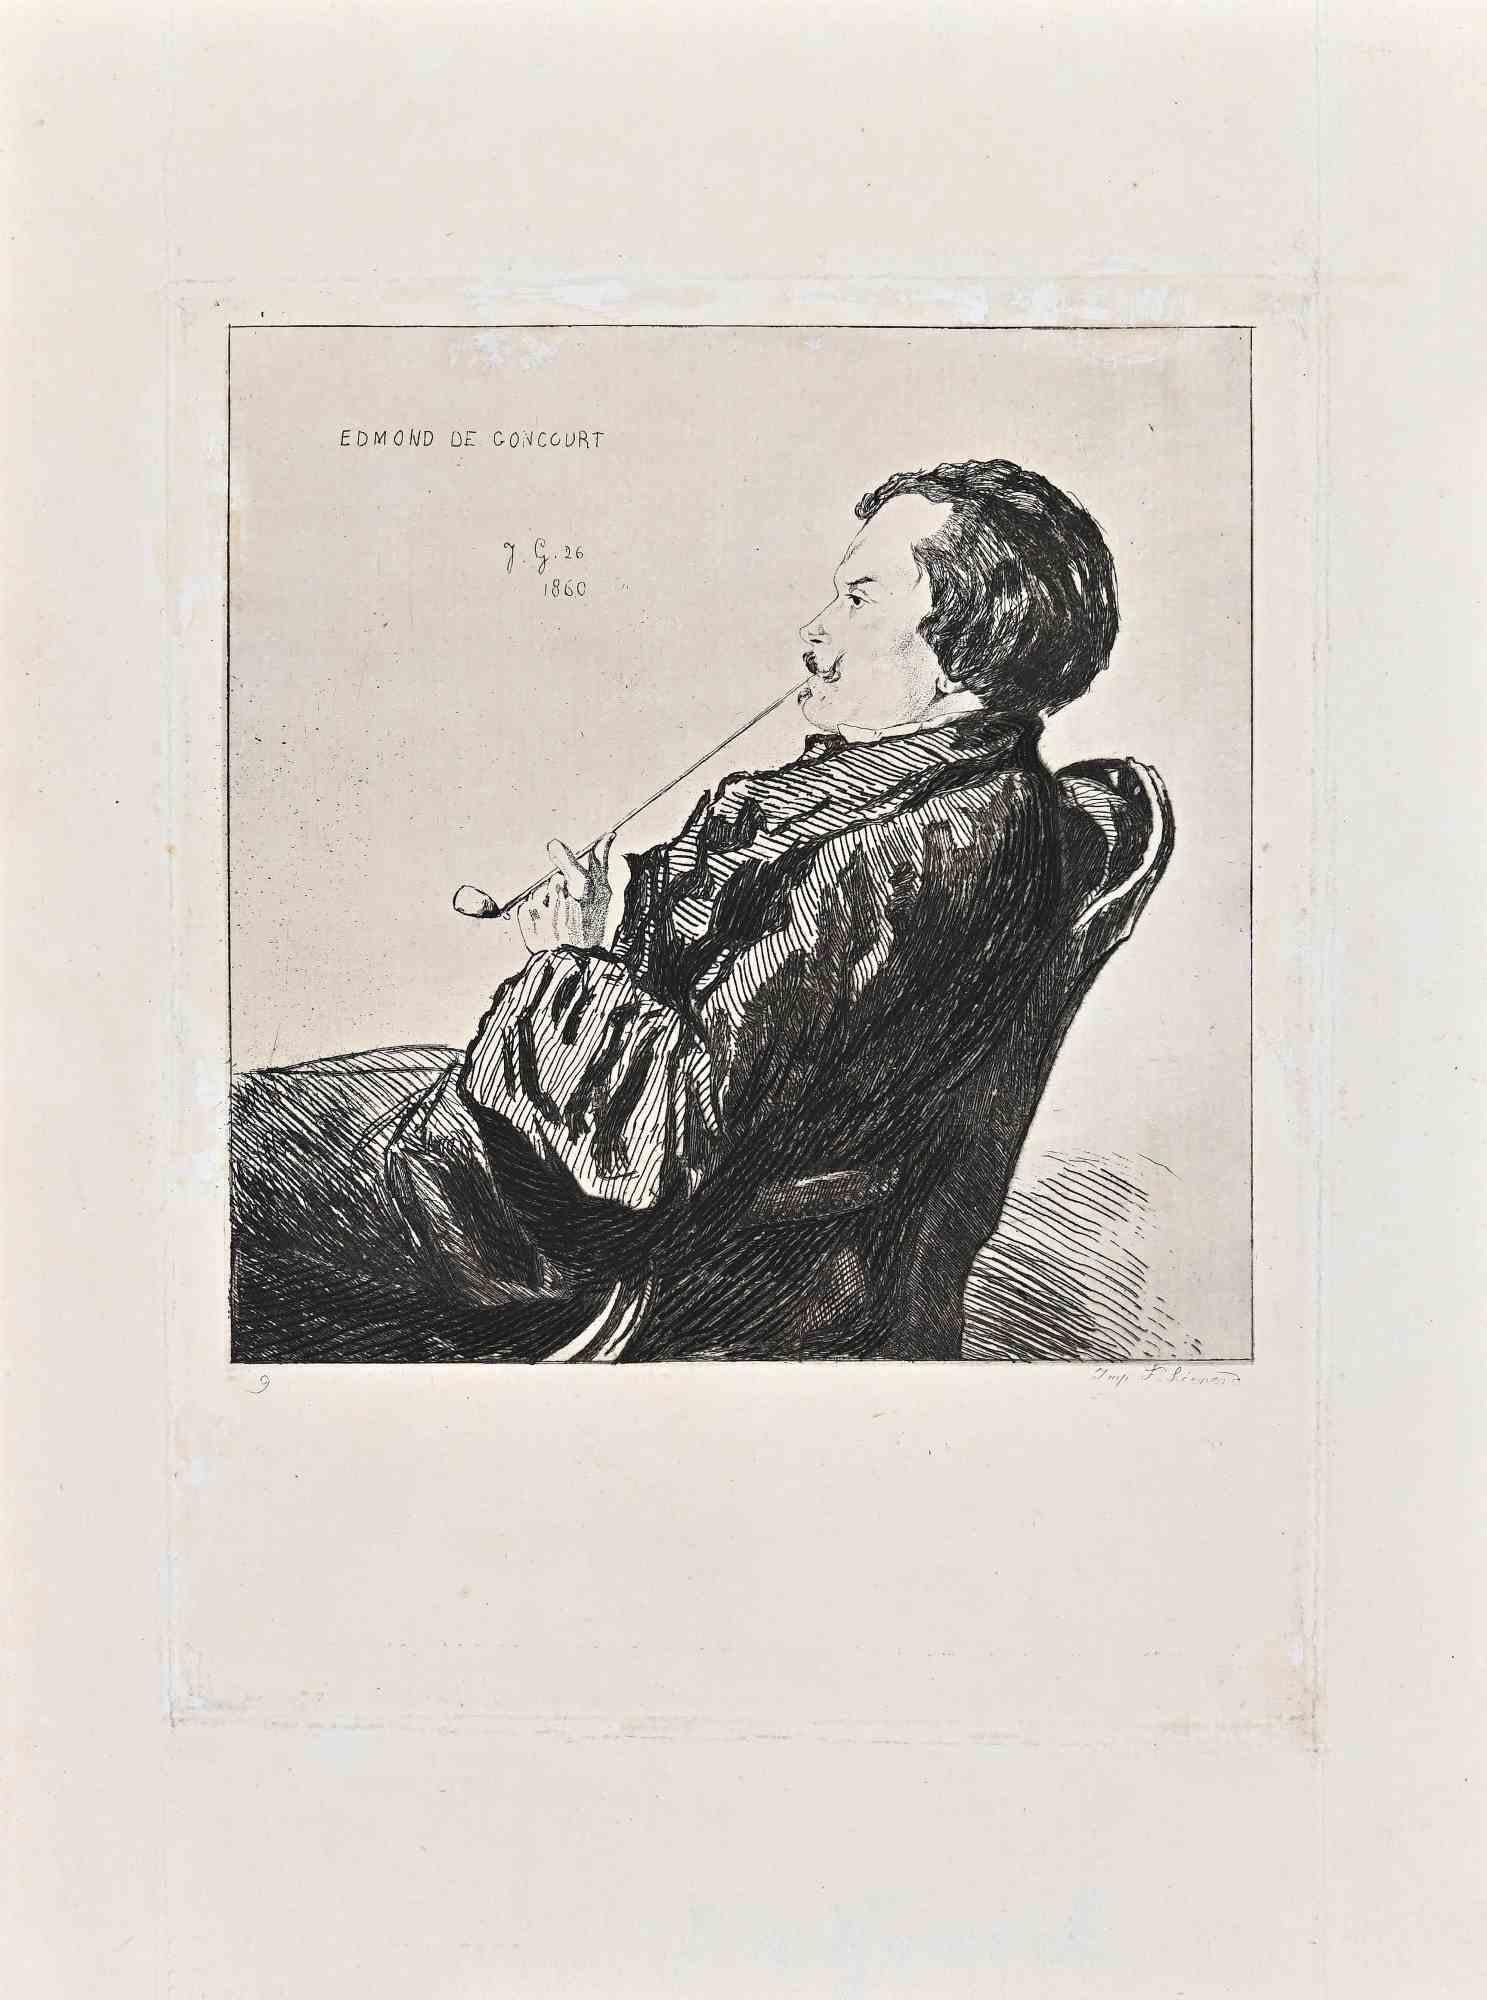 Portrait of Edmond de Goncourt is an Etching realized in 1860 by Jules de Goncourt (1830-1870).

The artwork is based on Gavarni's portrait.

Signature on the lower right corner on the plate. 

Good condition.

Jules de Goncourt (17 December 1830 -